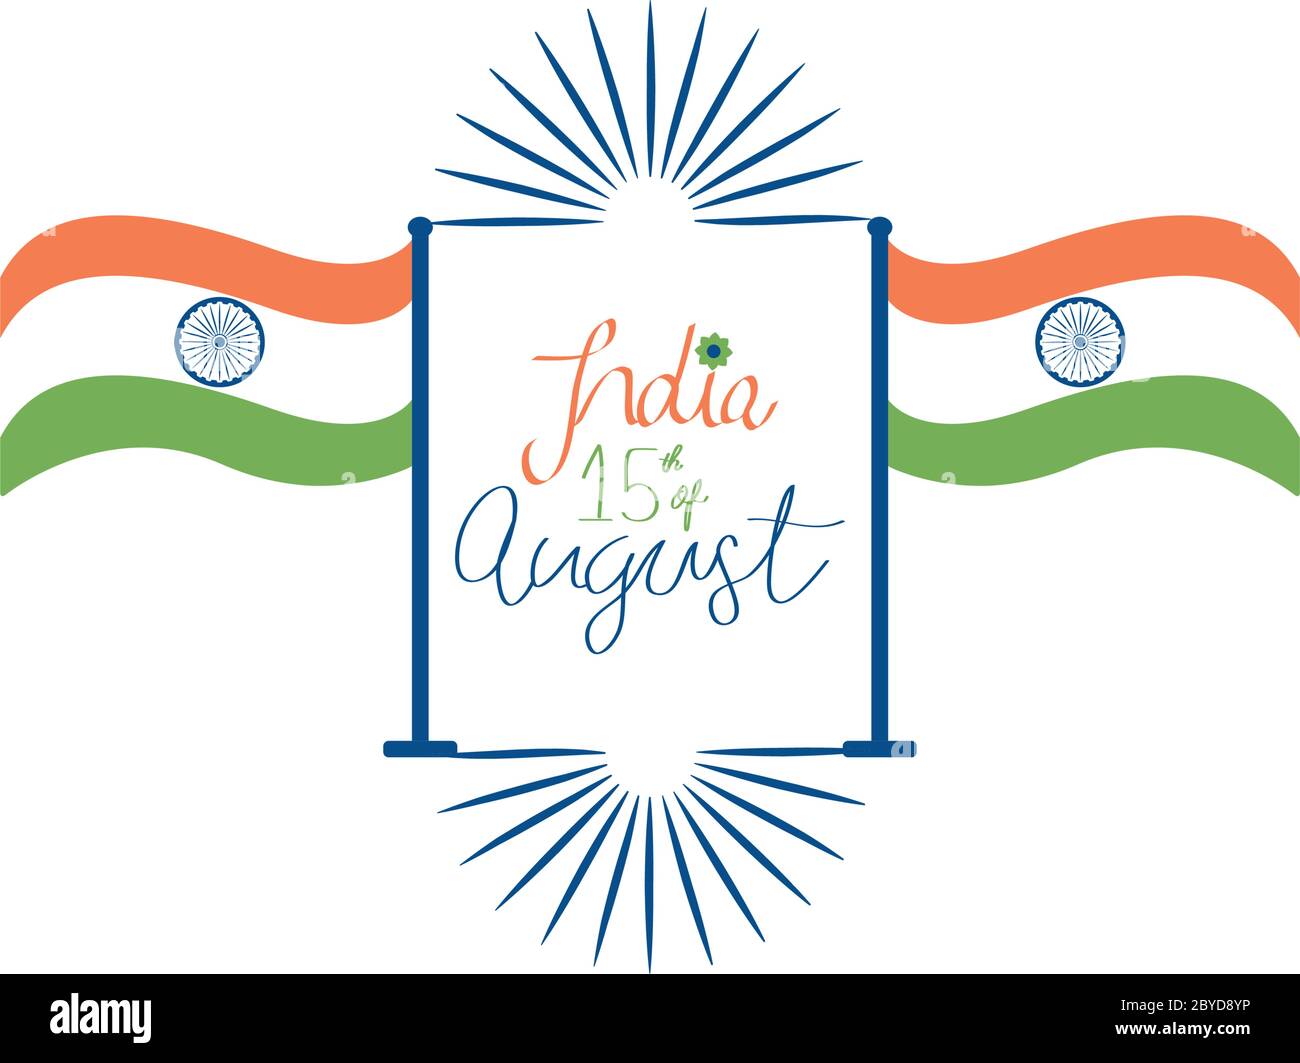 India independence day design with india flags and decorative ...